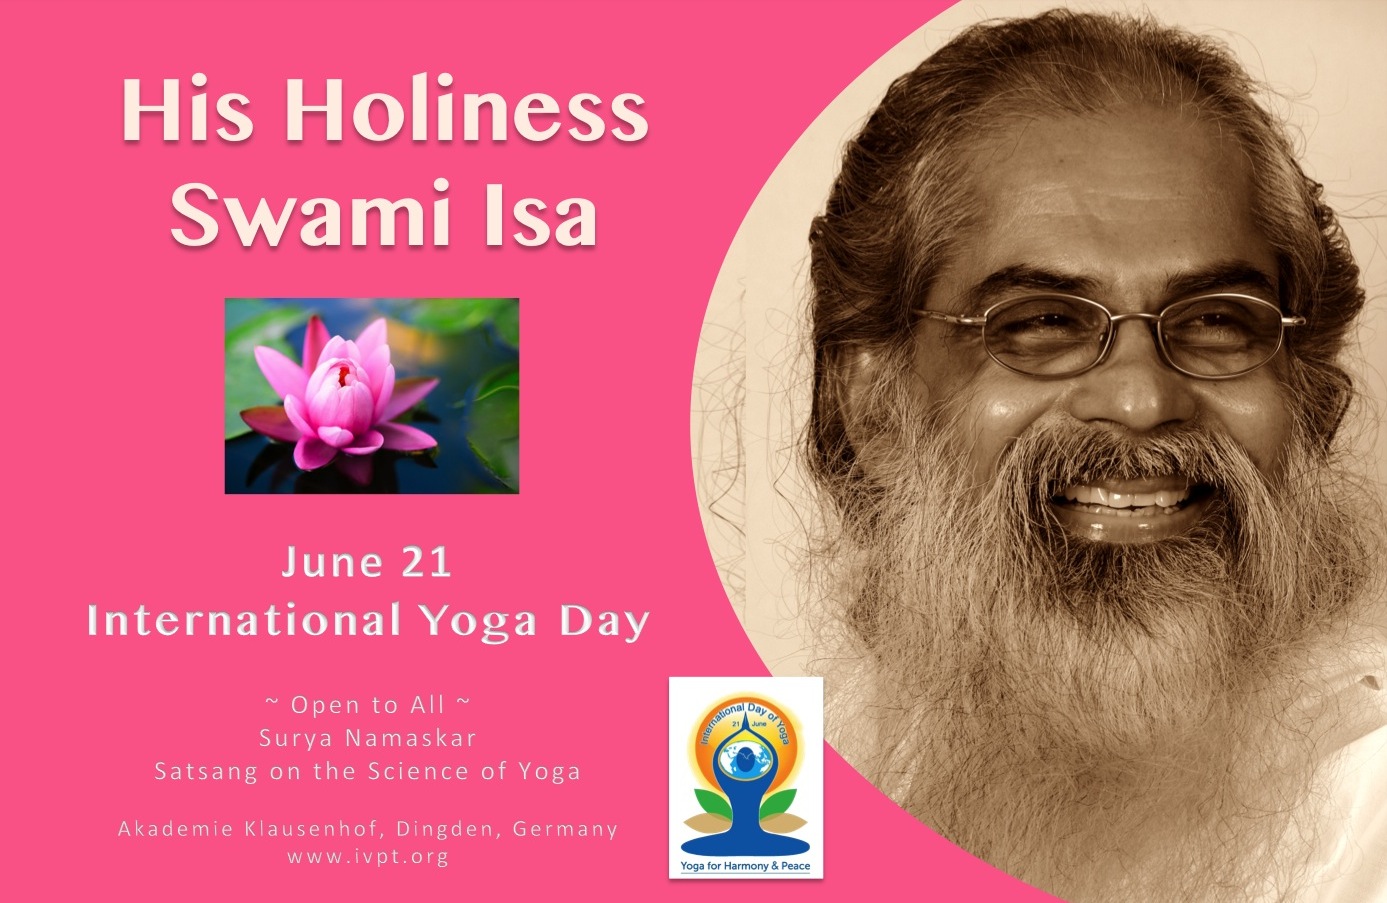 Swami Isa Yoga Day poster